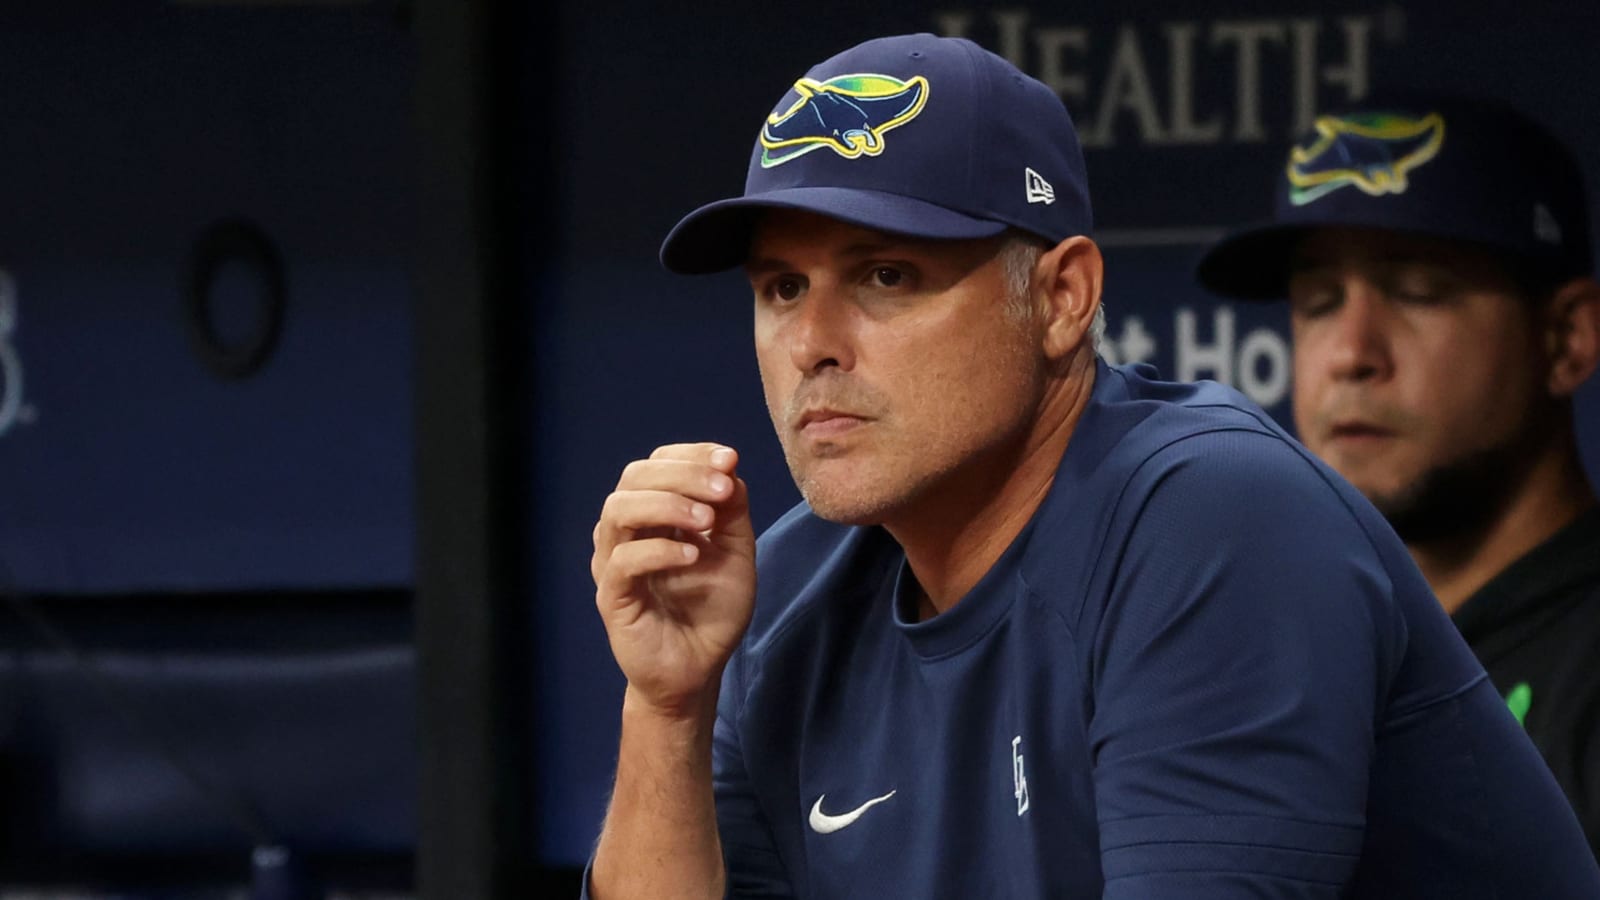 Rays manager Cash reportedly under contract through 2030 | Yardbarker